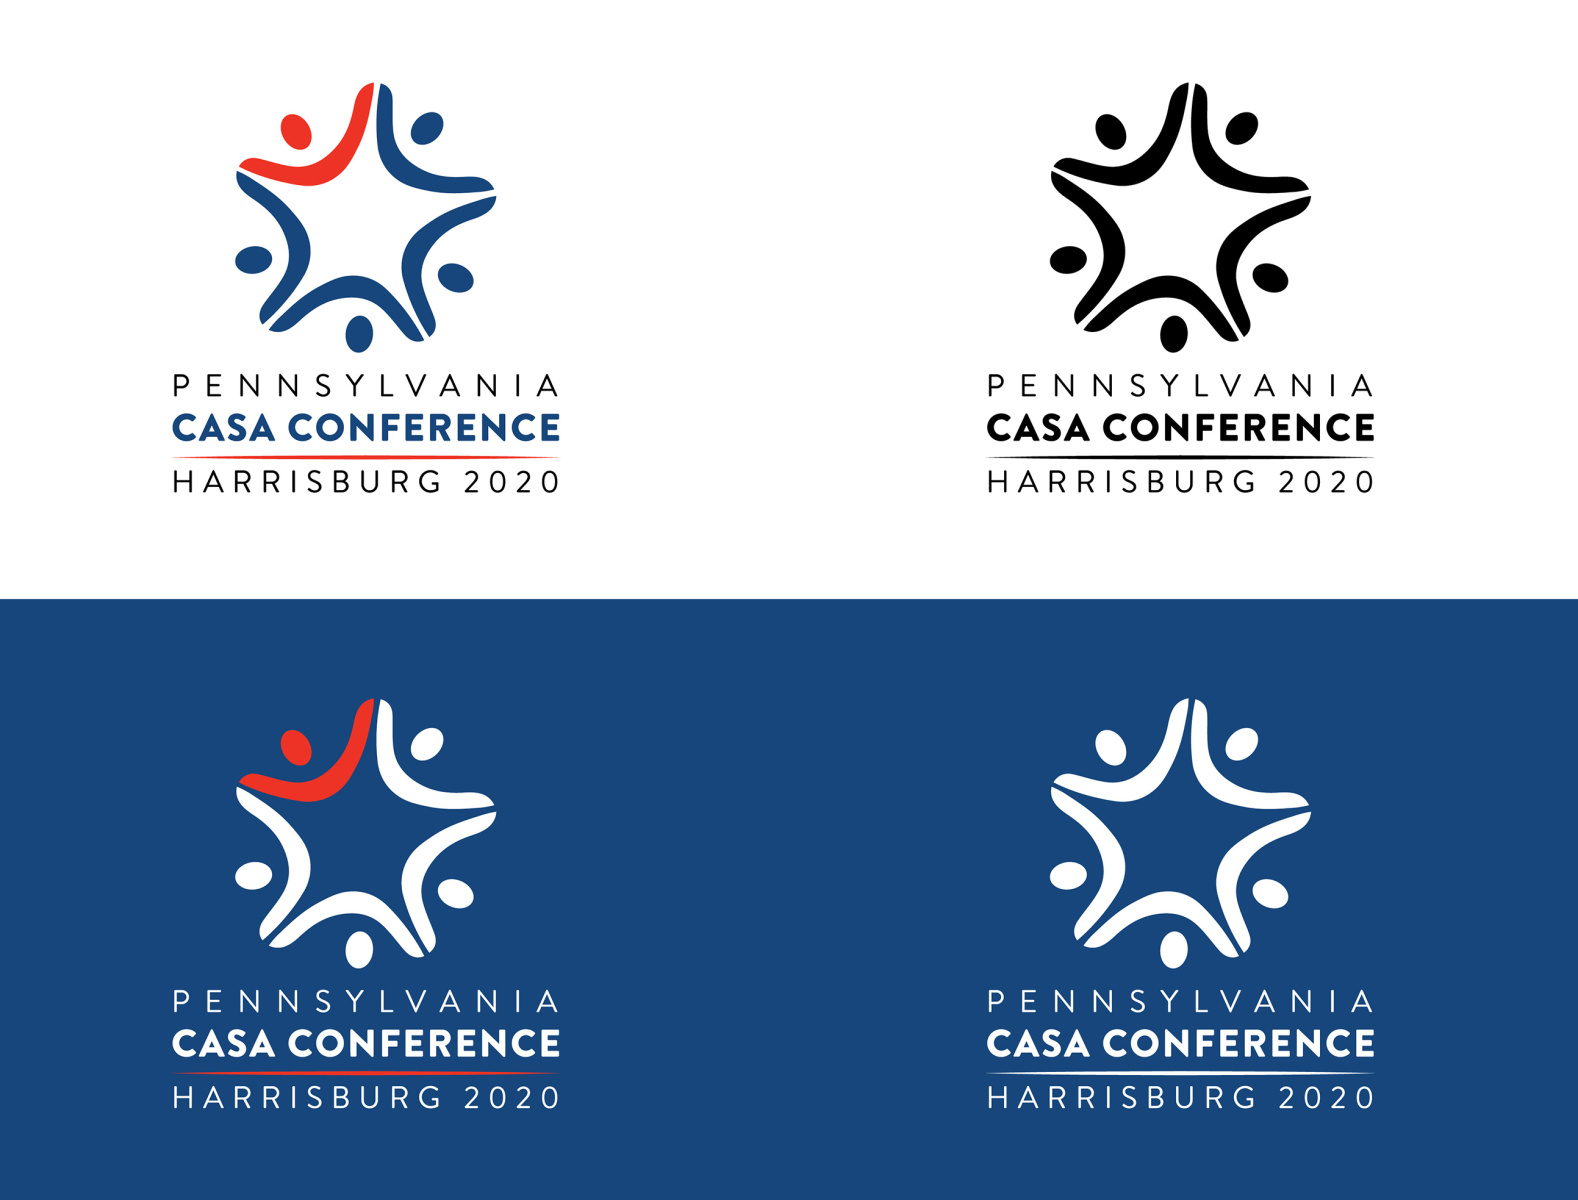 PA CASA - Conference 2020, Harrisburg by Kat Flaherty on Dribbble